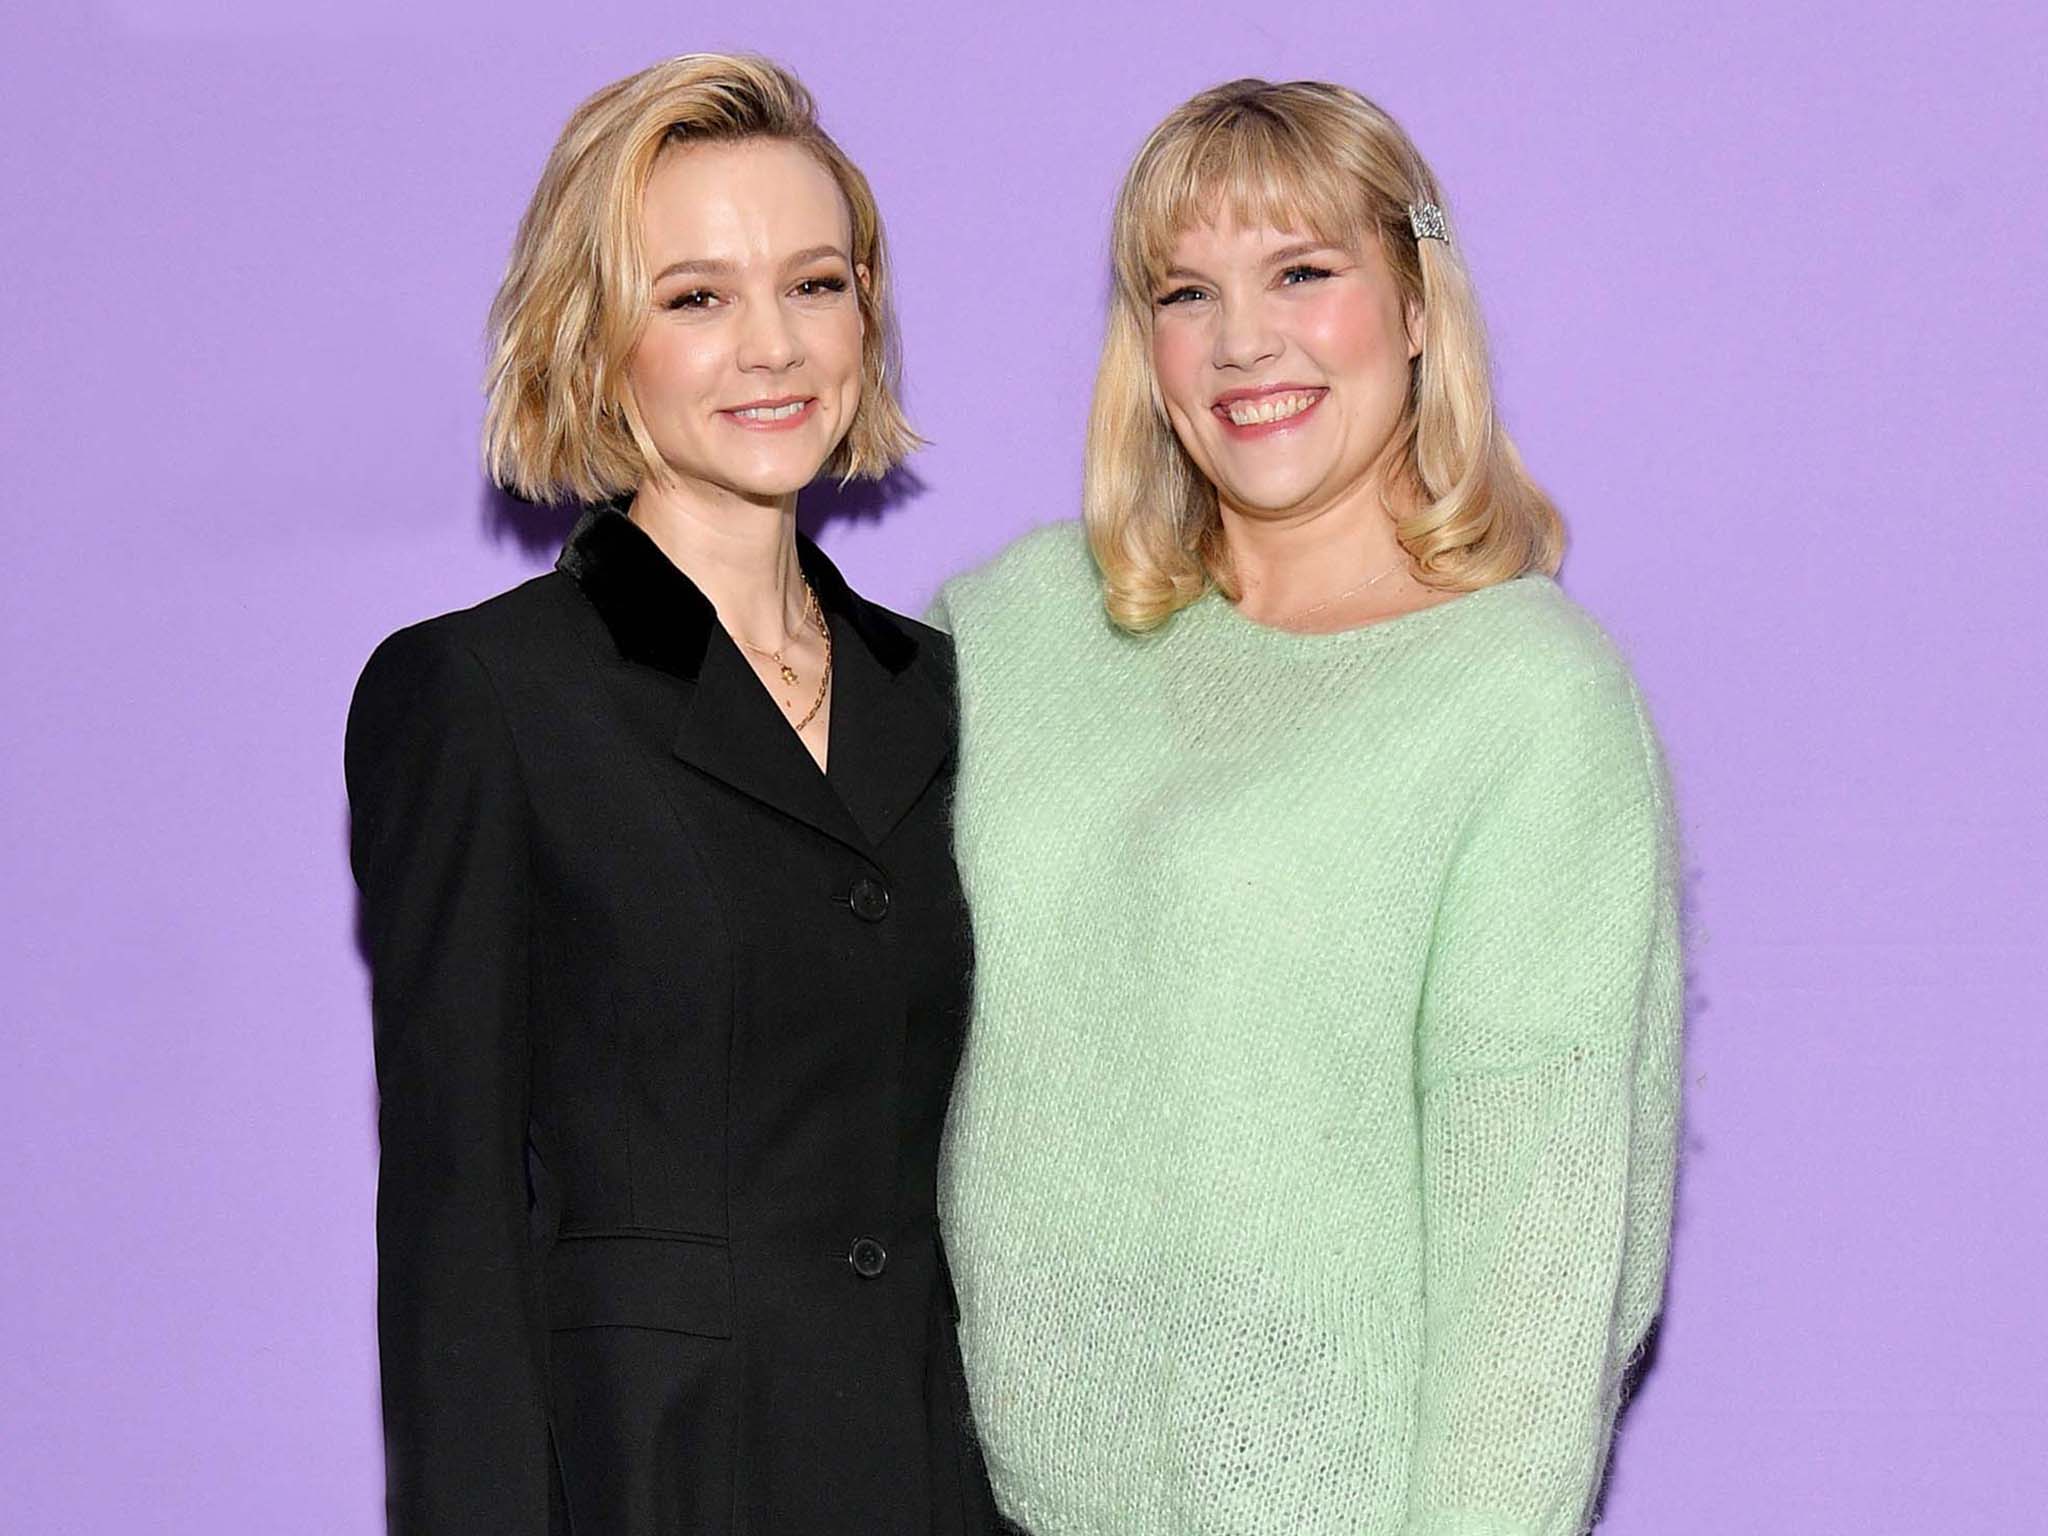 ‘It weaponises femininity:’ Carey Mulligan and writer-director Emerald Fennell on ‘Promising Young Woman’